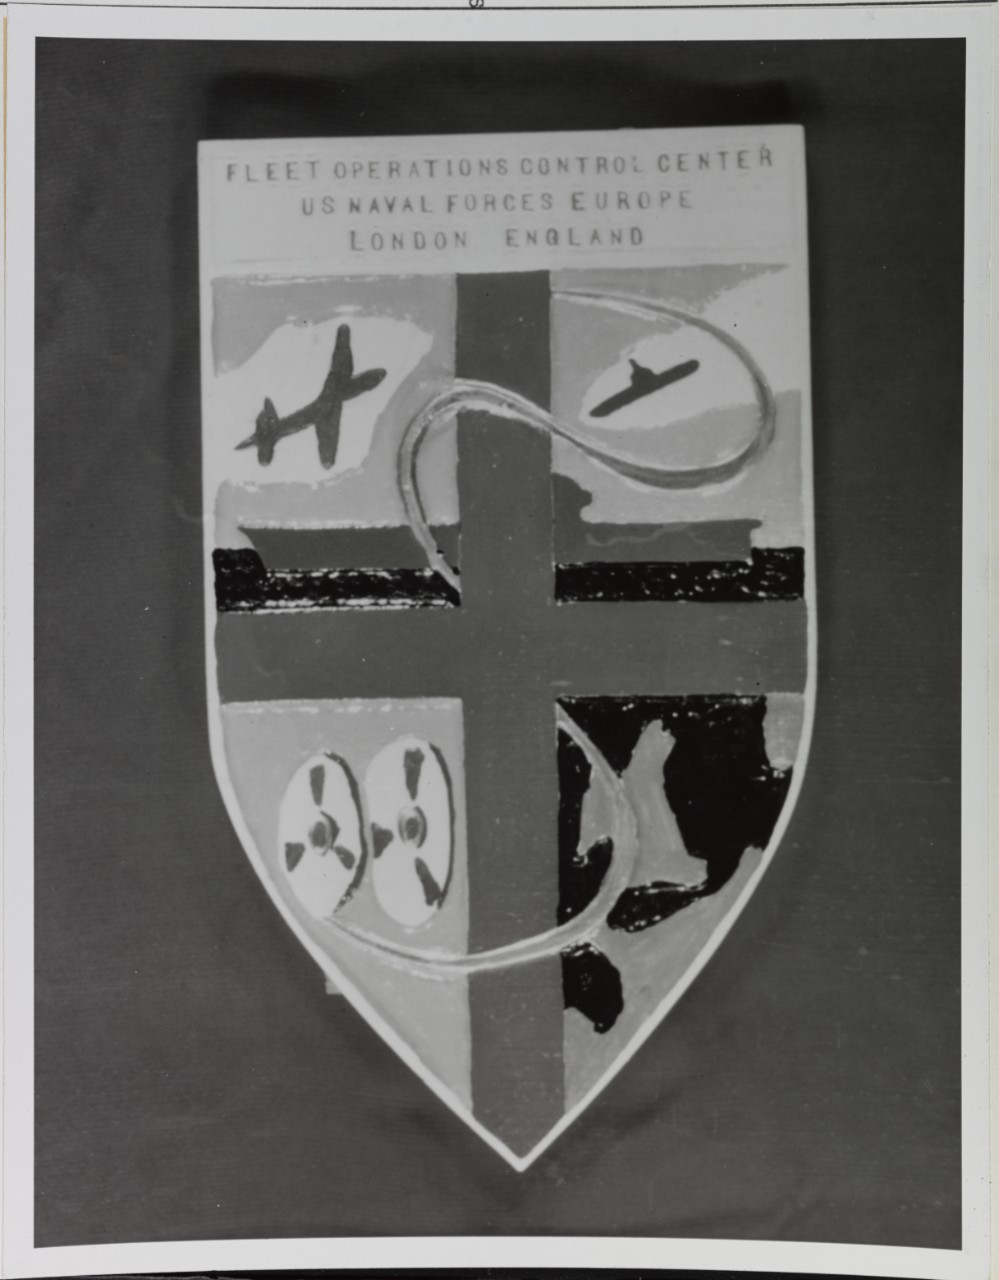 Insignia: Fleet Operations Control Center, U.S. Naval Forces Europe.